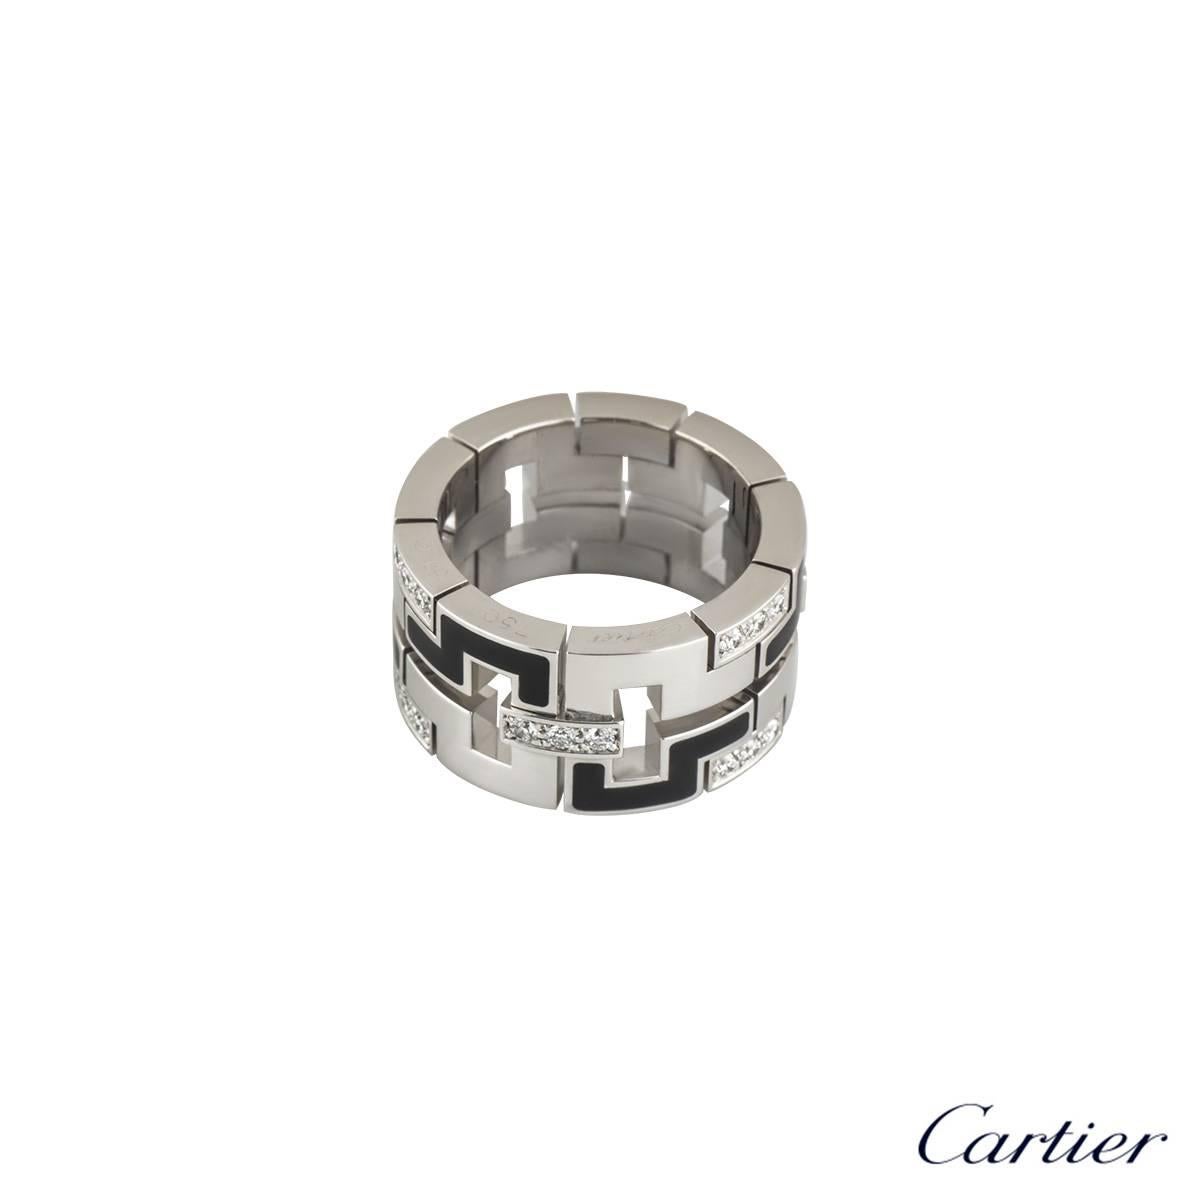 An 18k white gold dress ring from the Le Baiser Du Dragon collection by Cartier. The square abstract design alternates with polished, black enamel and diamond set links. The ring has 27 round brilliant cut diamonds with a total carat weight of